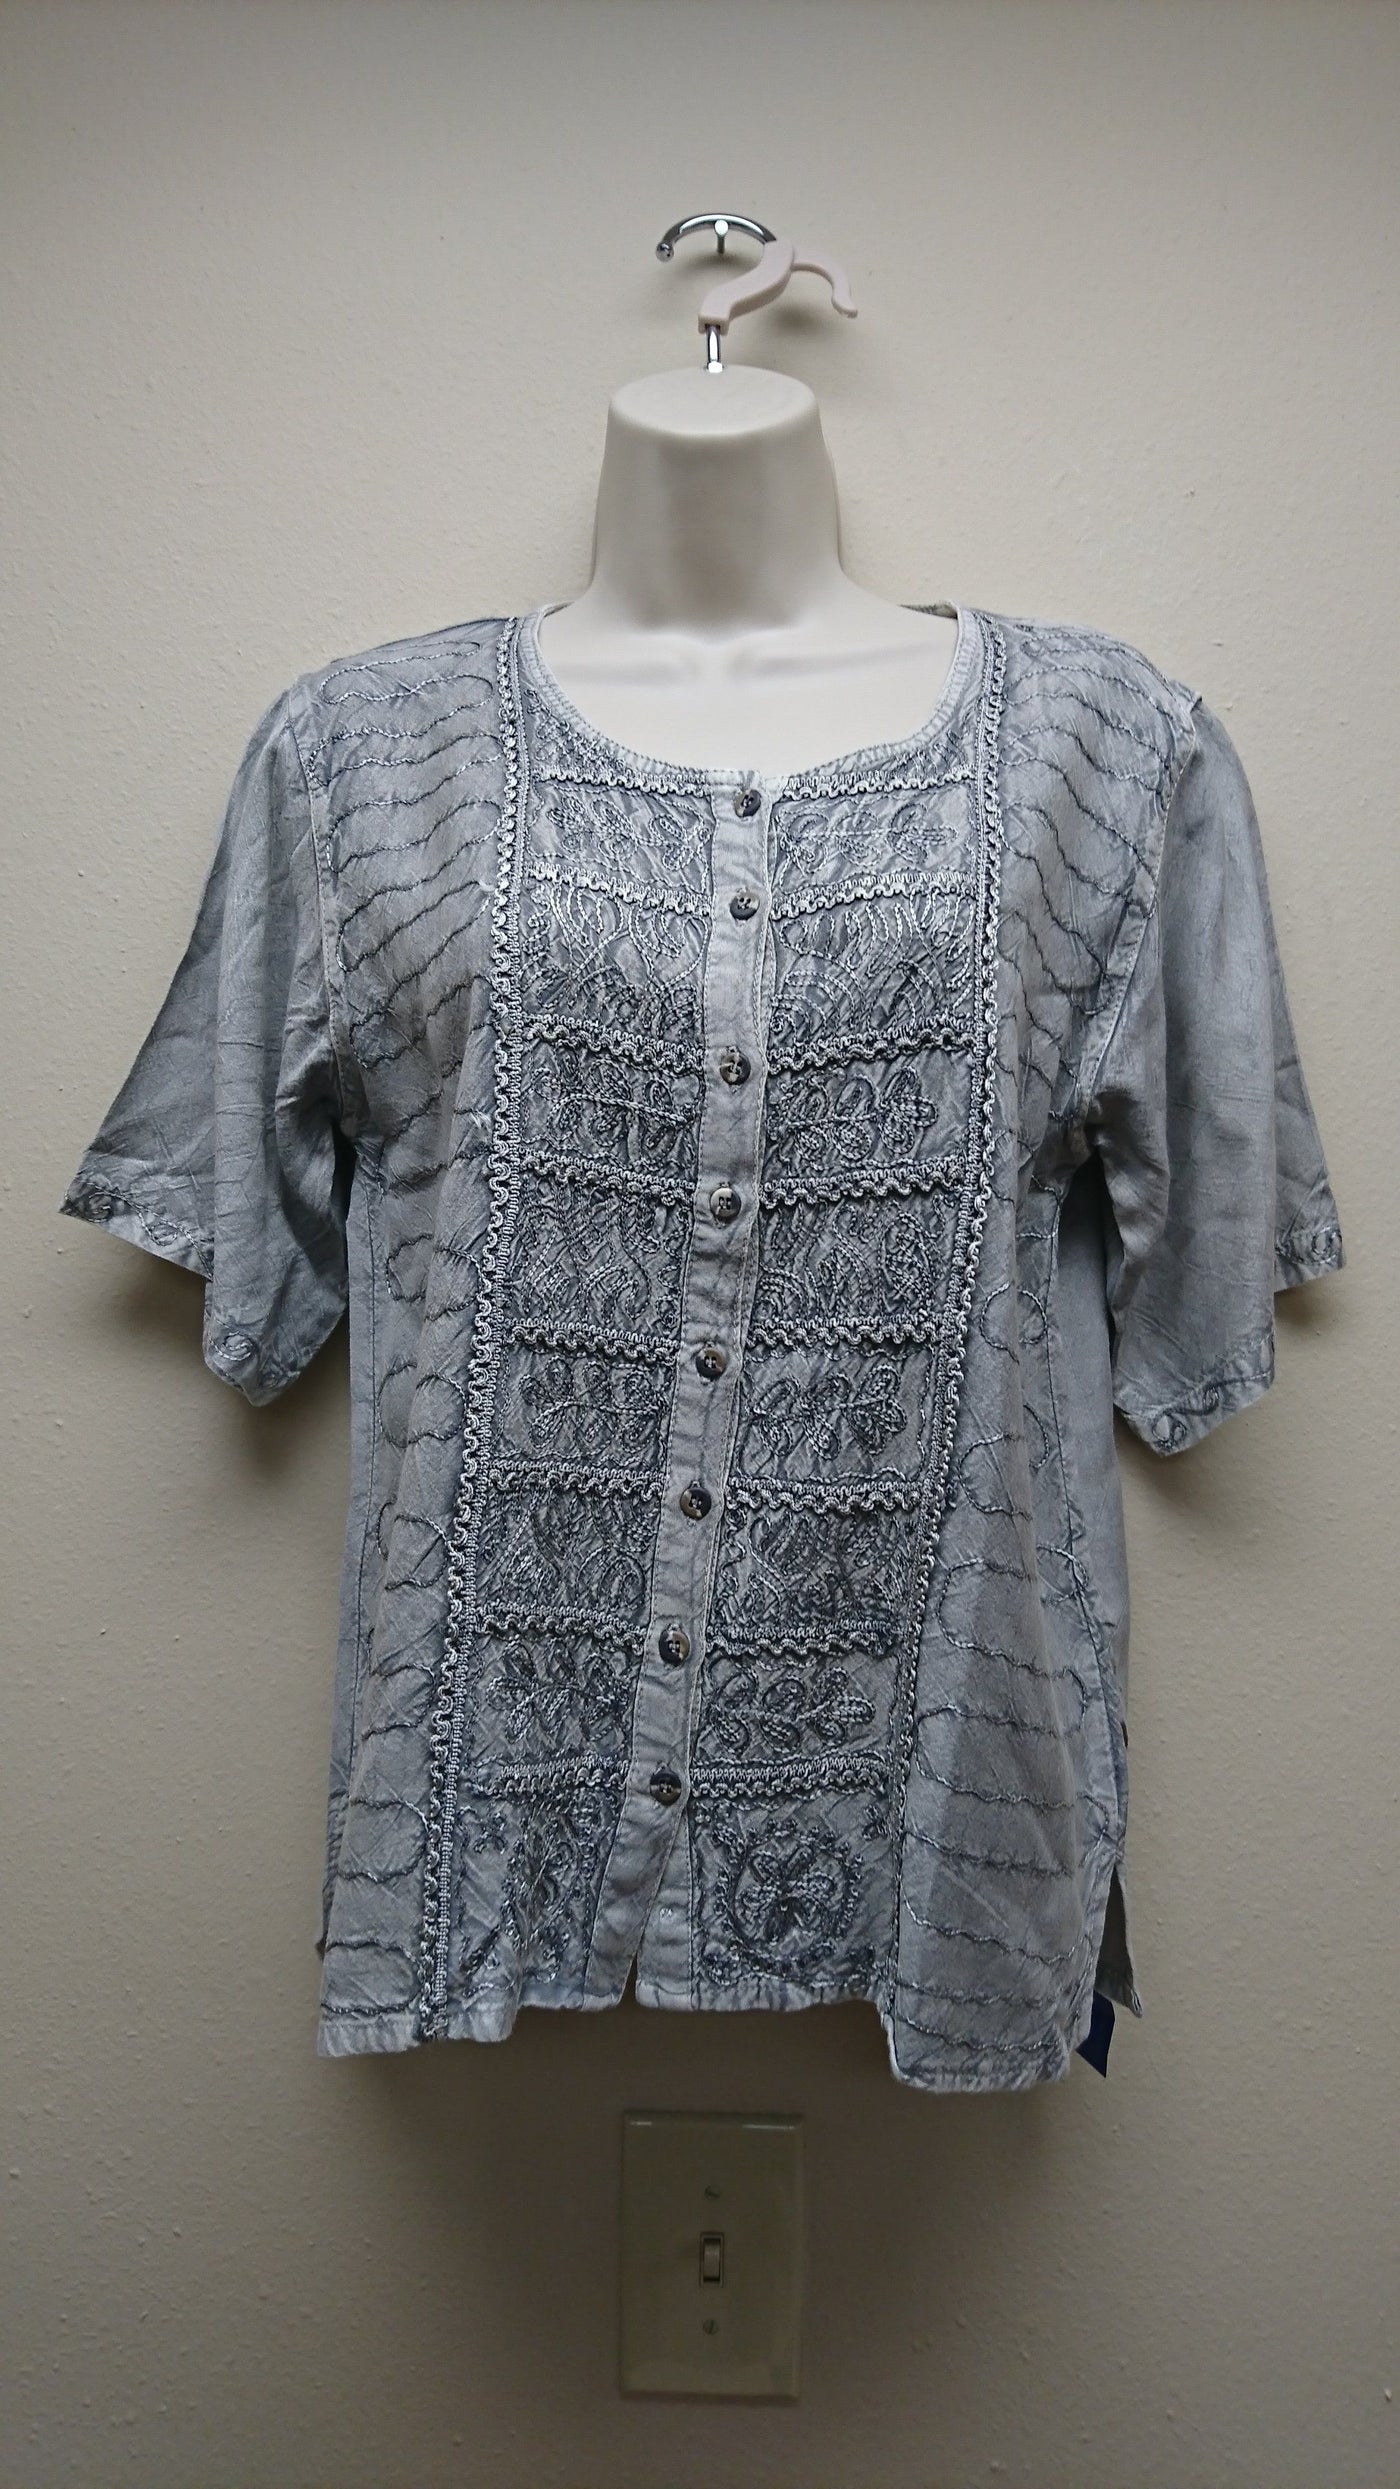 Kurti Blouse Shirt in light grey - Indian Clothing in Denver, CO, Aurora, CO, Boulder, CO, Fort Collins, CO, Colorado Springs, CO, Parker, CO, Highlands Ranch, CO, Cherry Creek, CO, Centennial, CO, and Longmont, CO. Nationwide shipping USA - India Fashion X